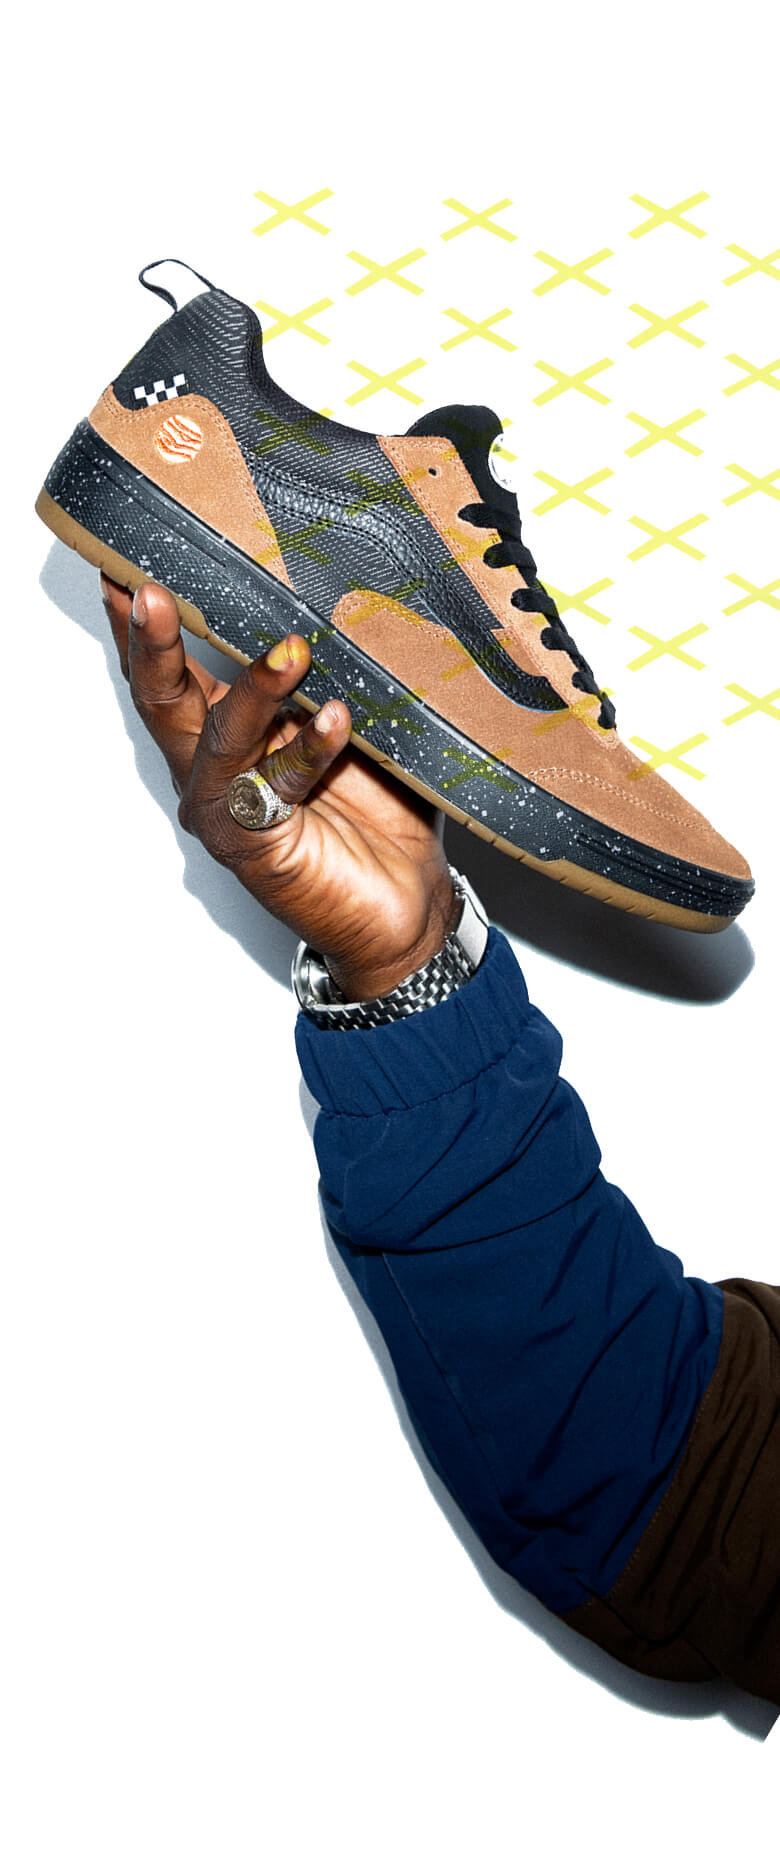 Zion Wright's arm holding Le Zahba shoe with the Zion colorway overlaid with a yellow repeating x pattern.